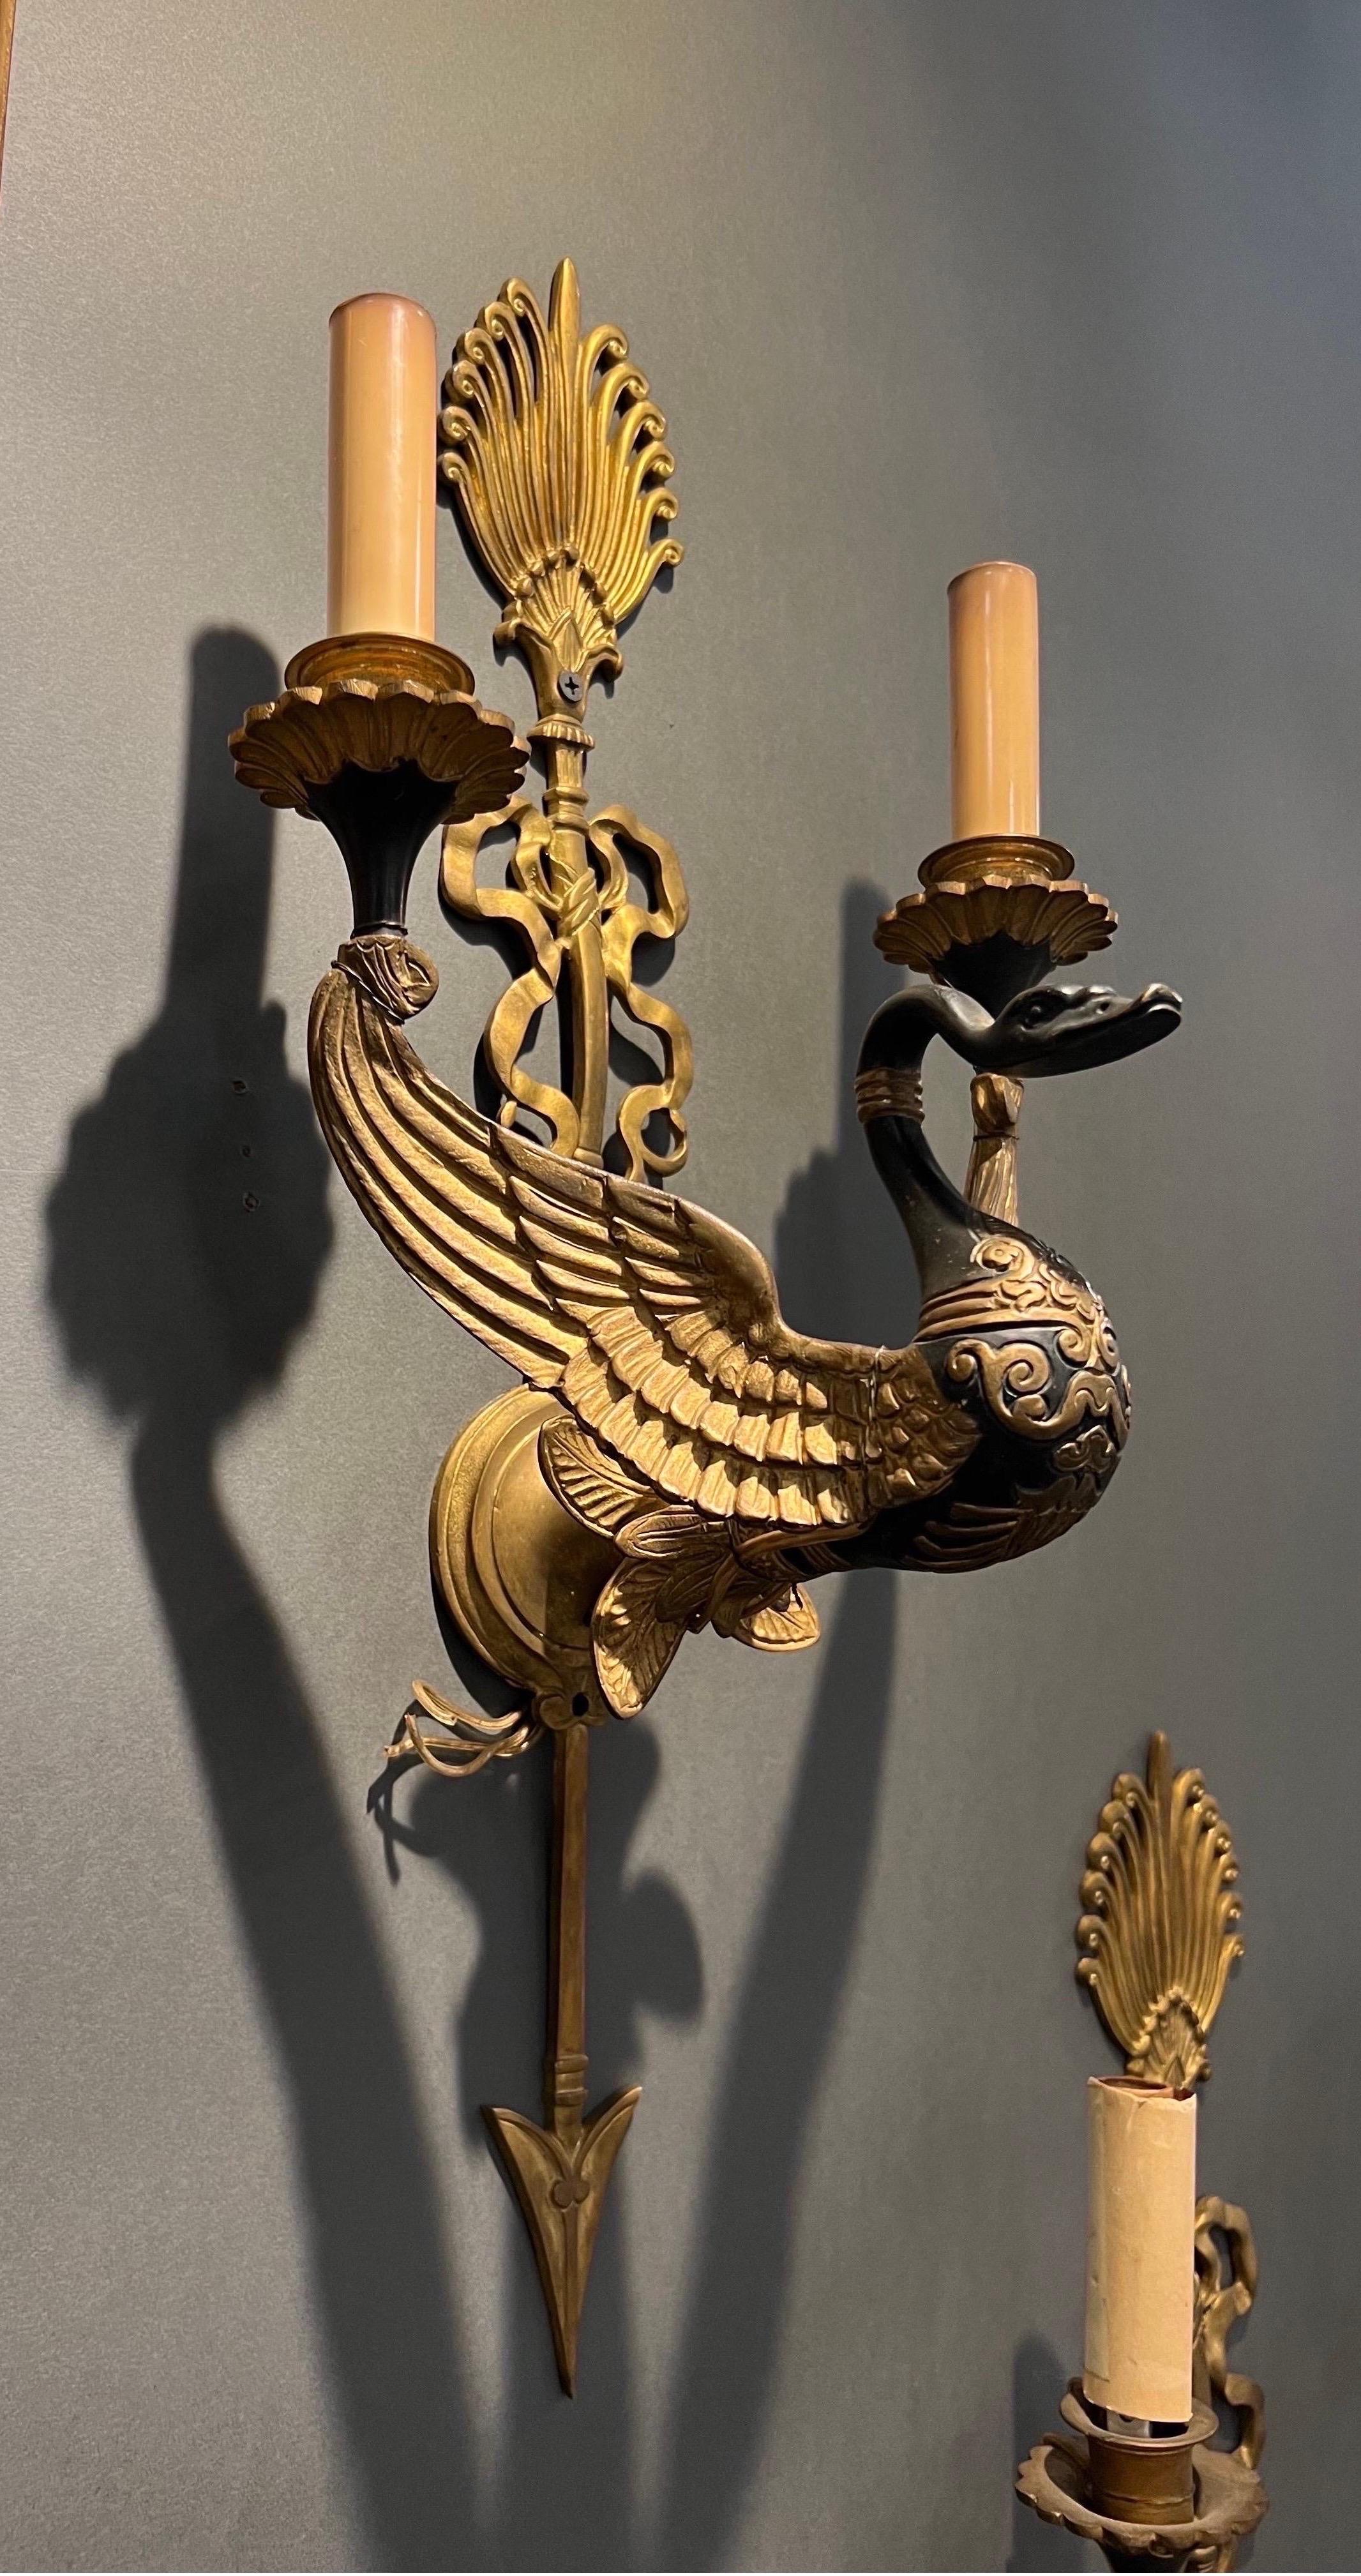 Fine early 19th century French neoclassical / empire swan form sconces. Incredible quality and patina.